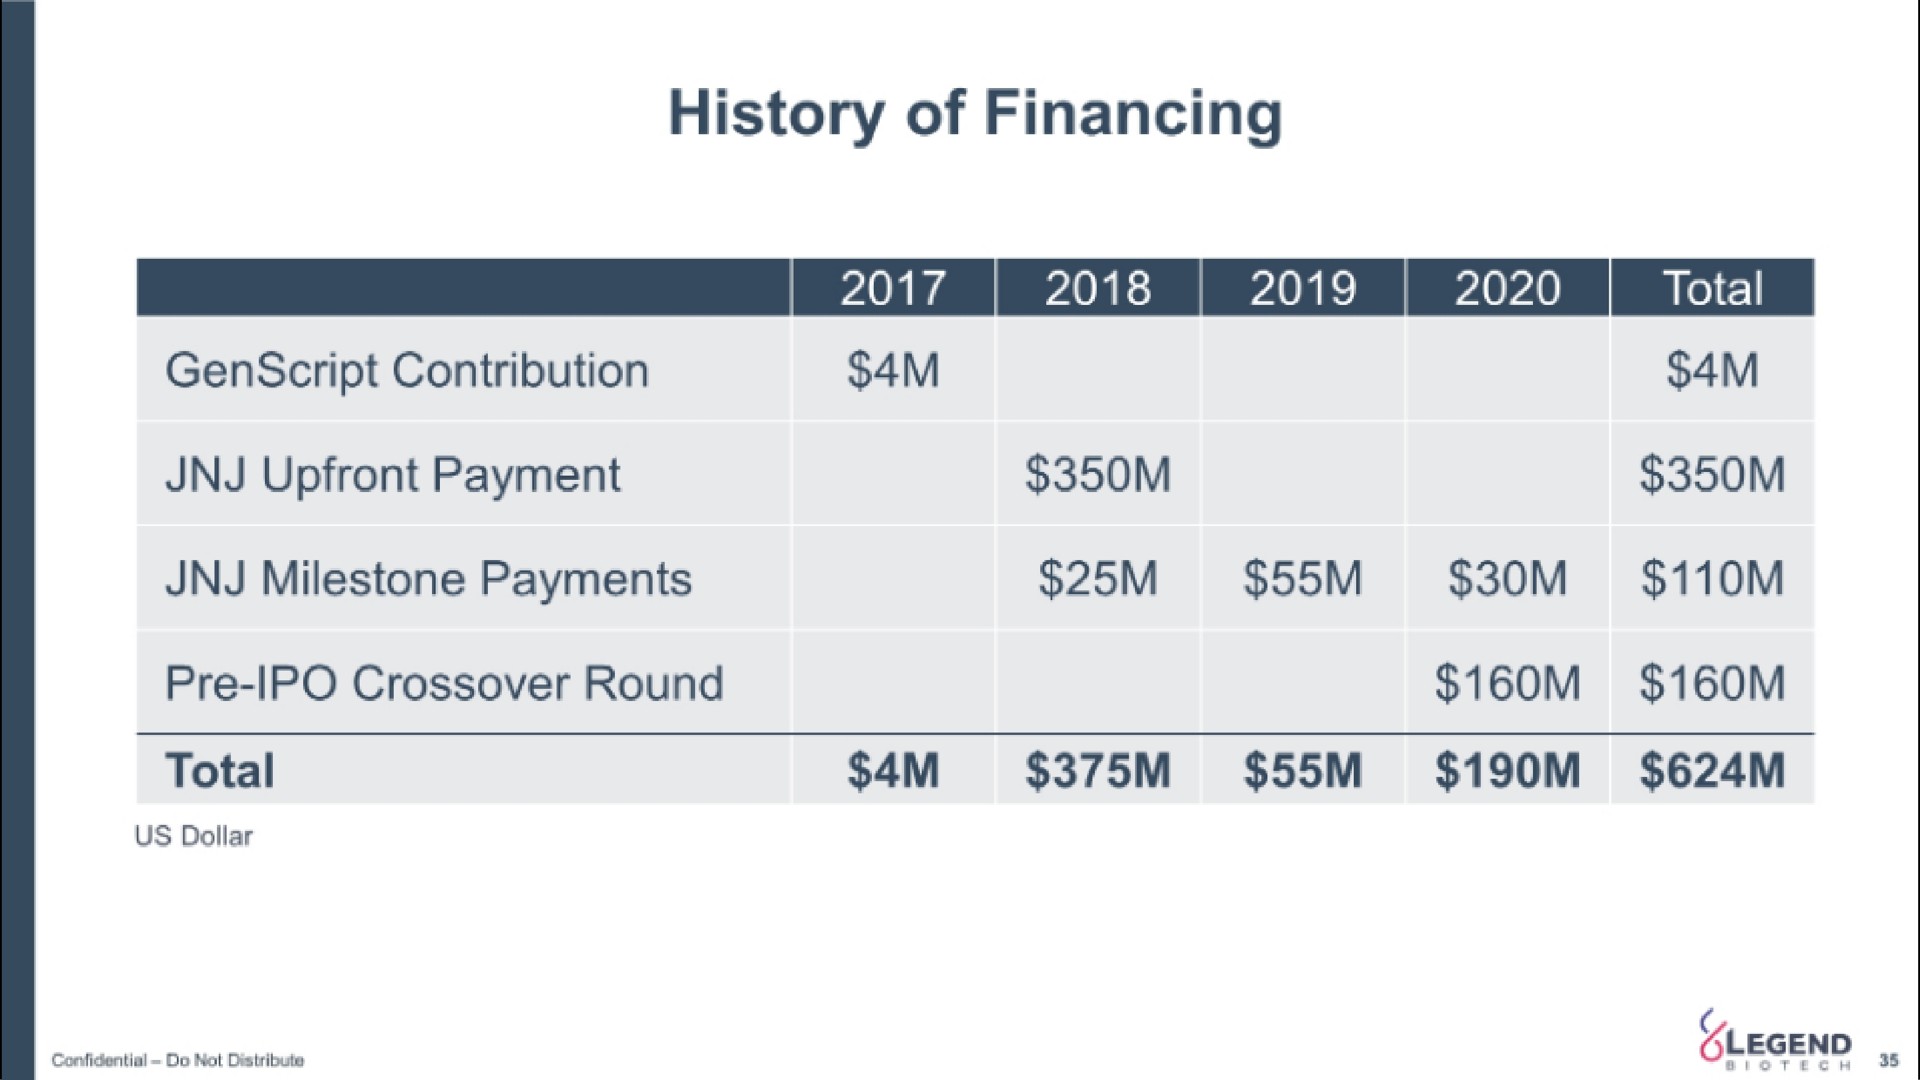 history of financing payment crossover round total | Legend Biotech